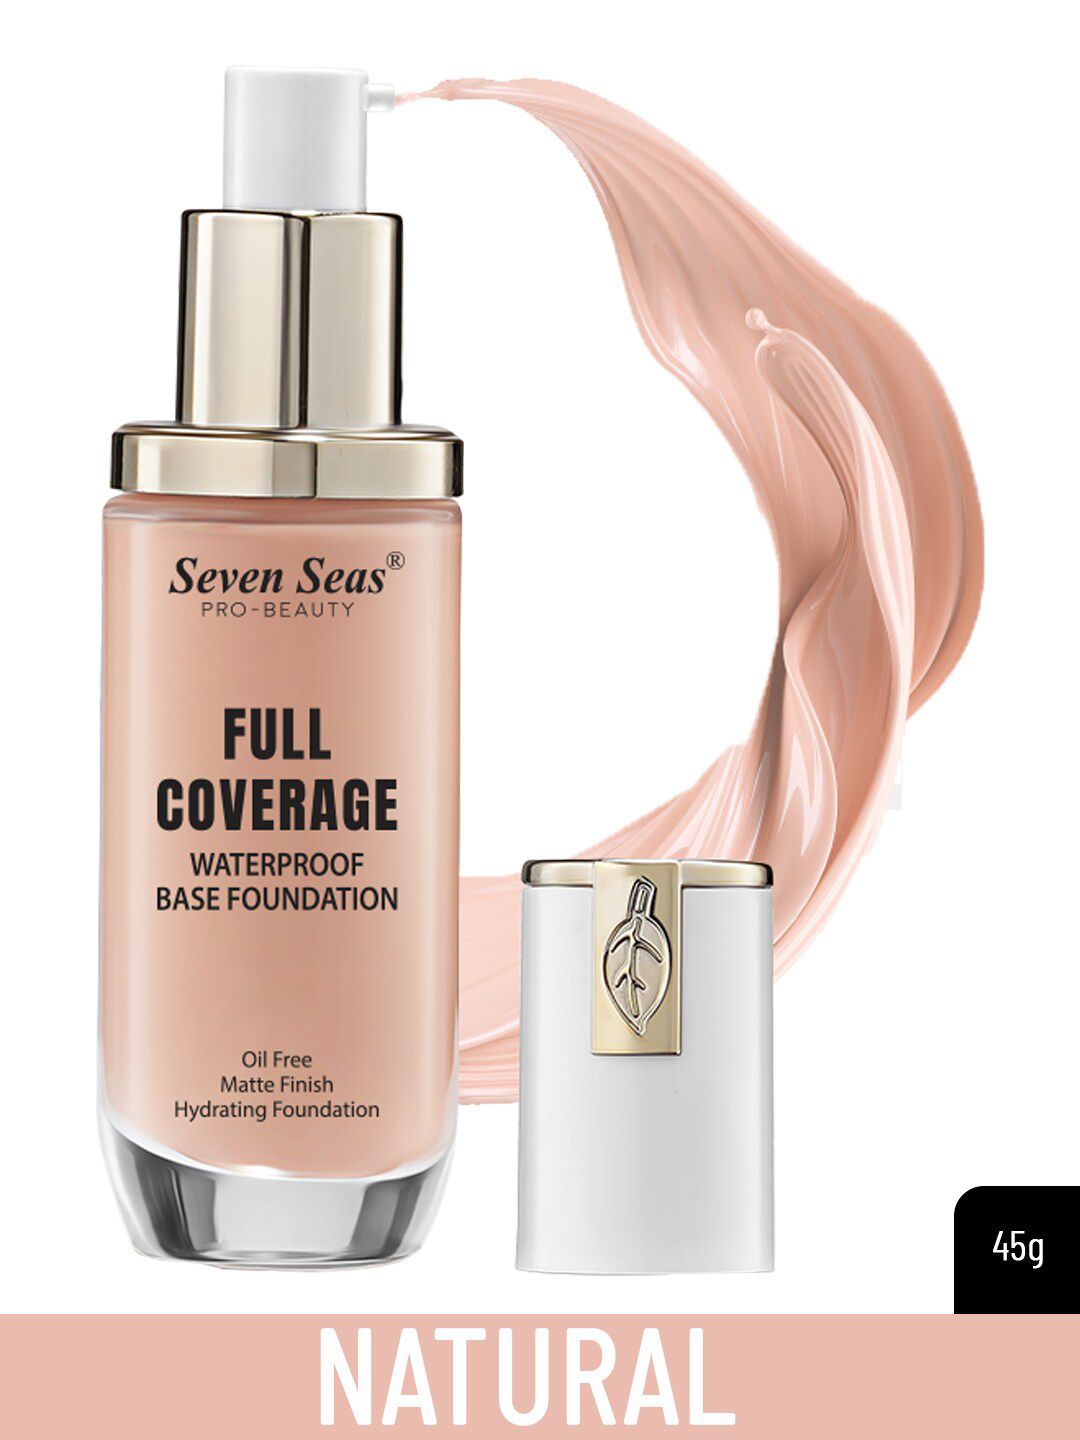 Seven Seas Full Coverage Waterproof Matte Finish Base Foundation - Natural Price in India